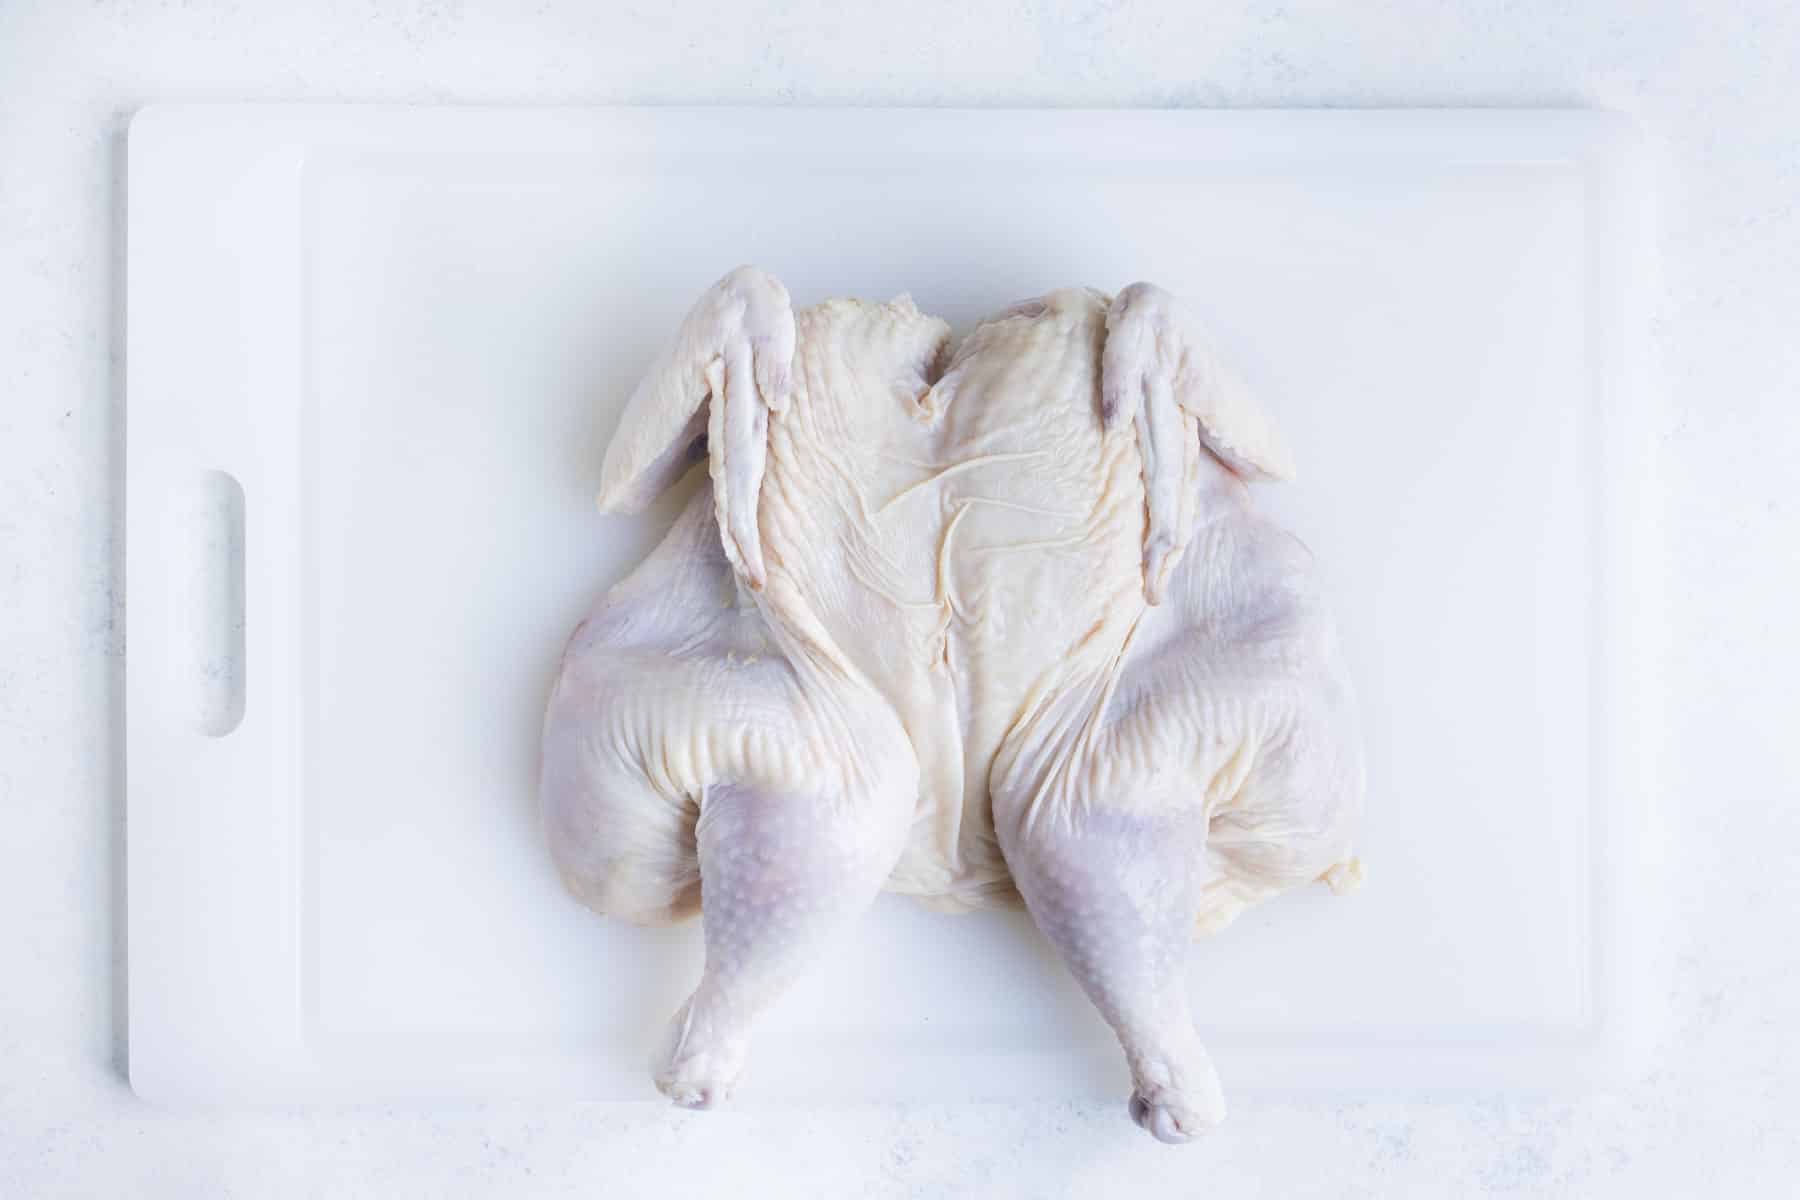 A spatchcocked chicken is ready to season.